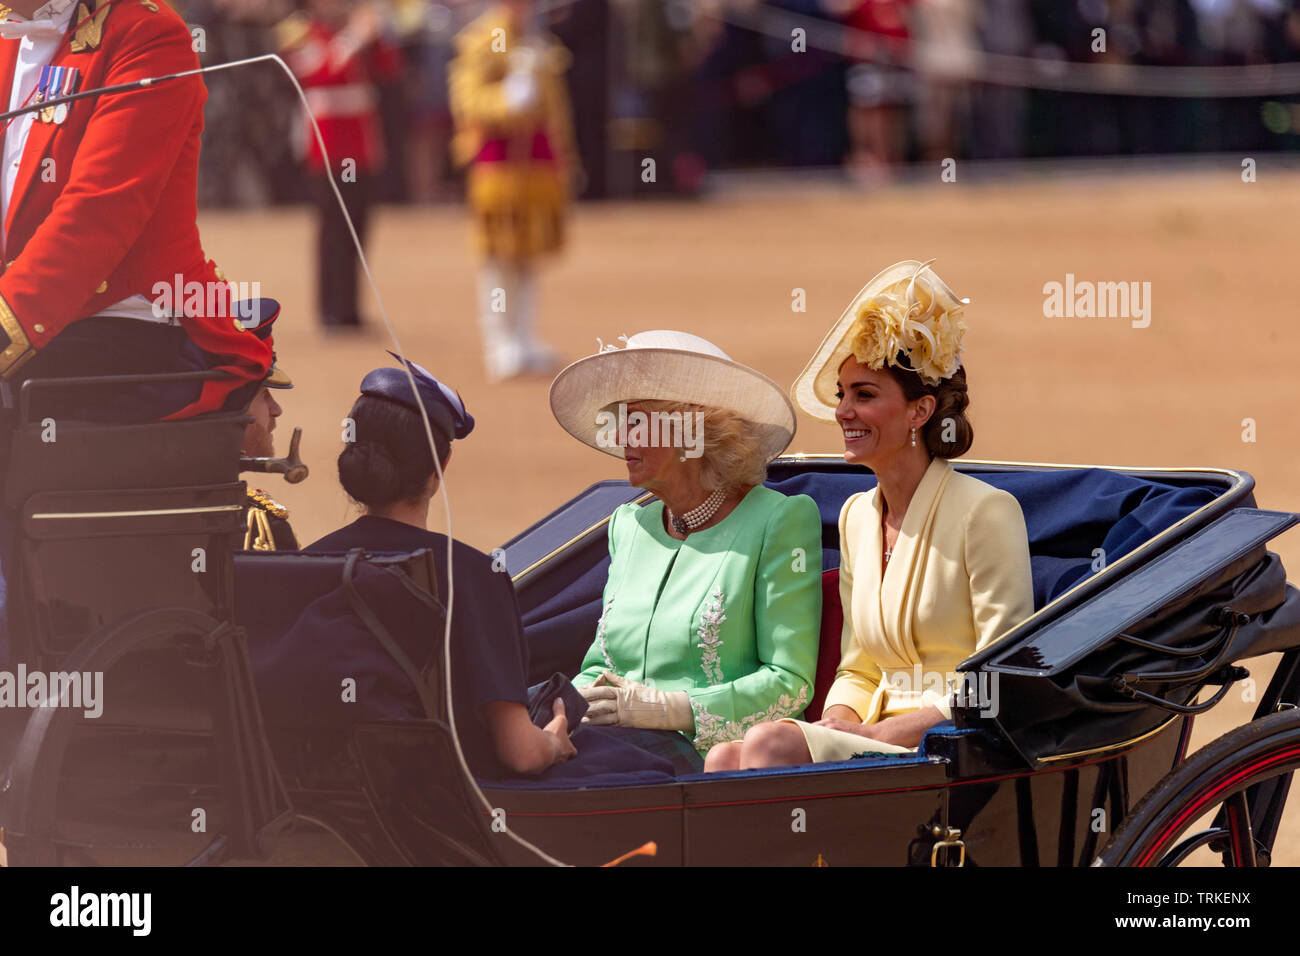 London, UK. 8th June 2019 Trooping the Colour 2019, The Queen's Birthday parade on Horseguards Parade London in the presence of Her Majesty The Queen.  Colour trooped by the 1st Battalion Grenadier Guards Duchess of Cornwall and Duchess of Cambridge Credit Ian Davidson/Alamy Live News Stock Photo